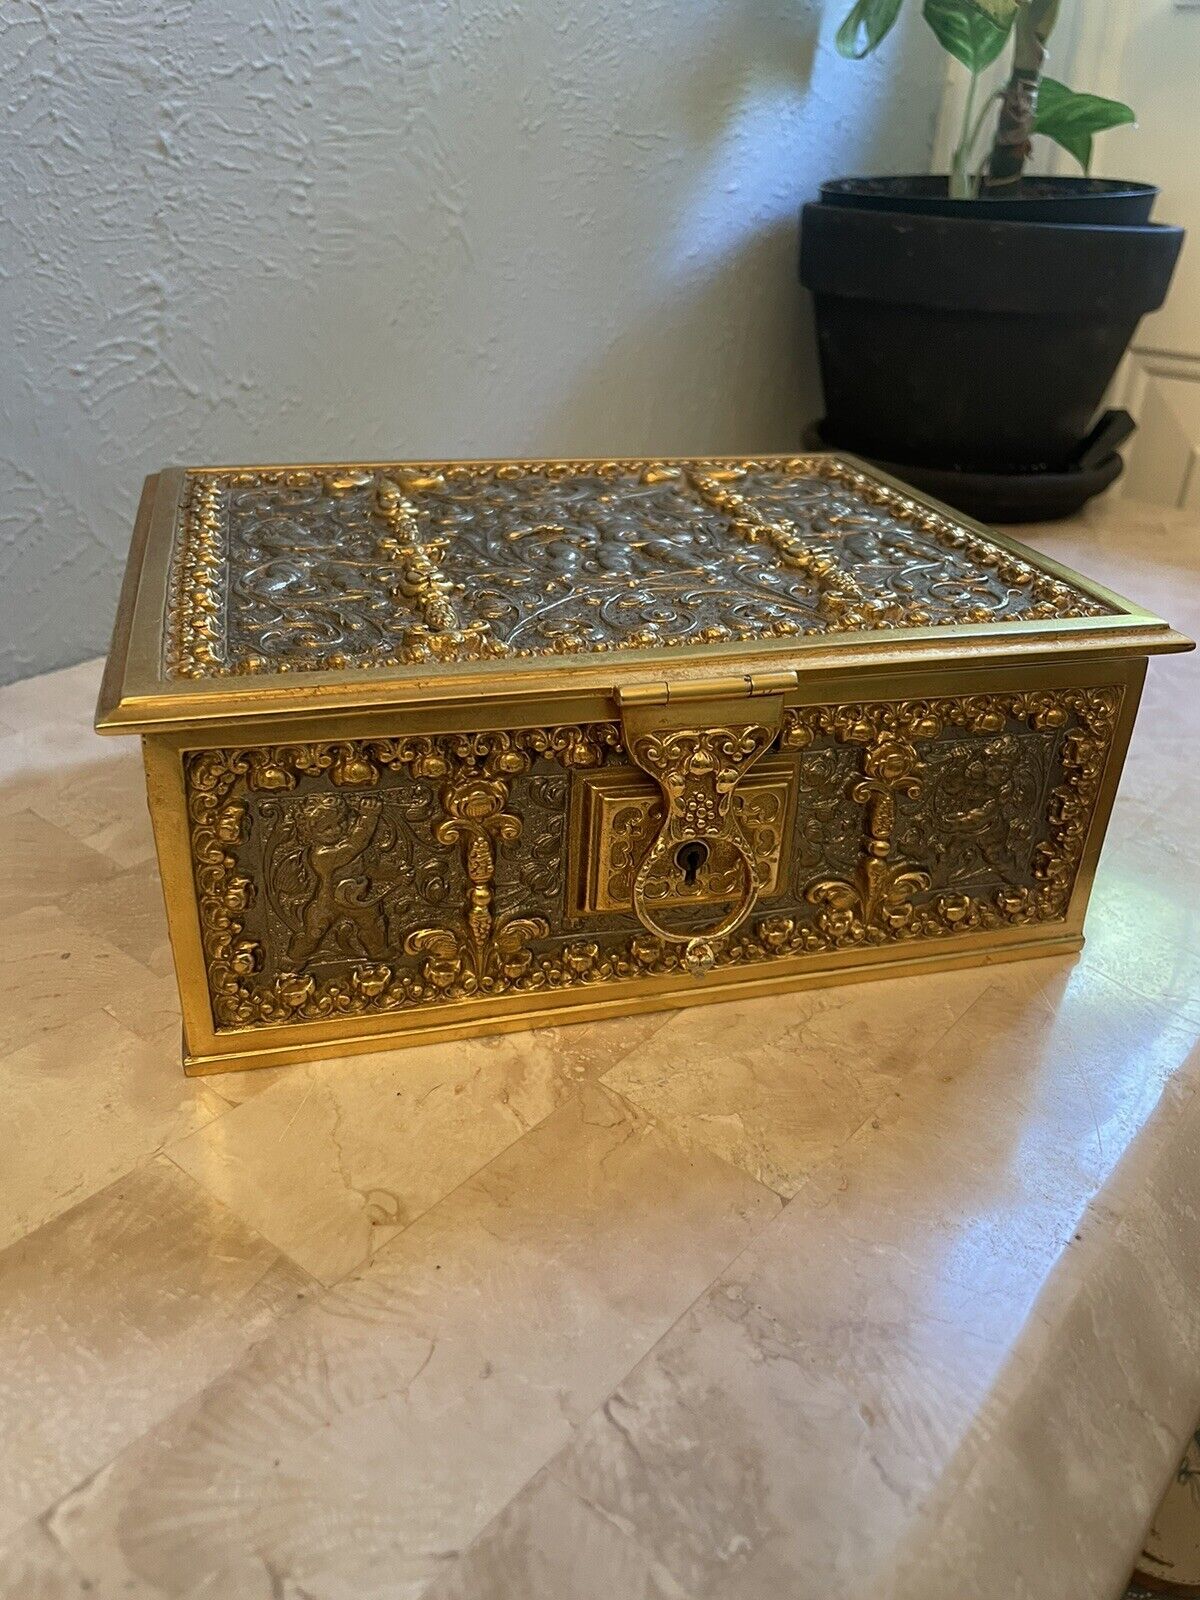 Late 19thC/Early 20thC Brass Putti Themed Casket Box With Latched Lid - 8x3x7/34